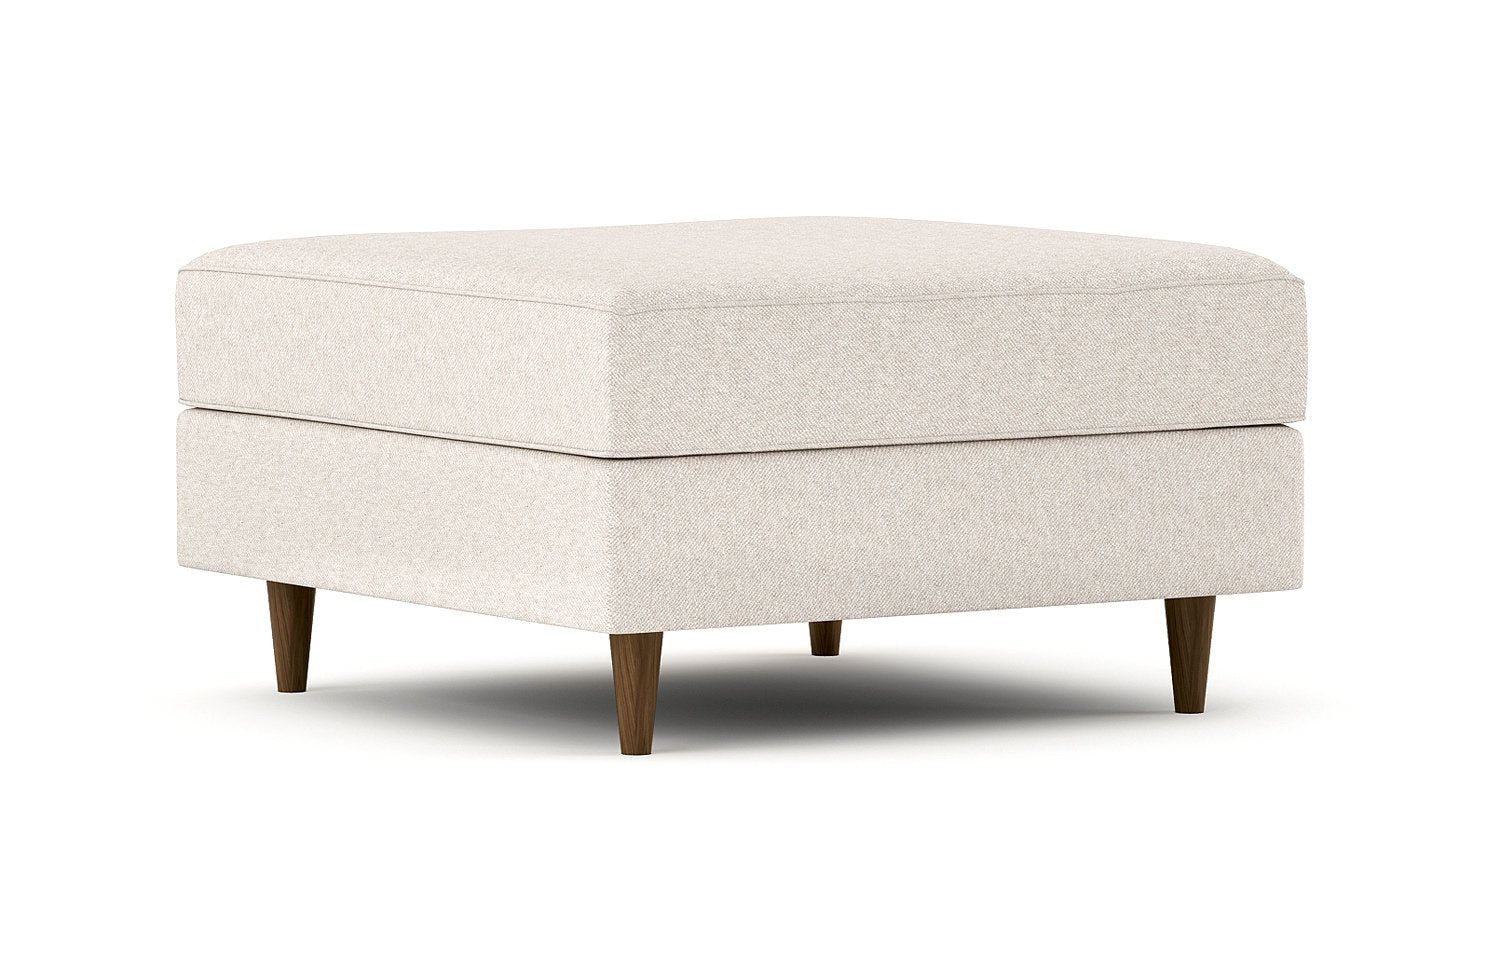 G: Mota Ottoman shown in Texture Oyster fabric and Thom Cafe legs